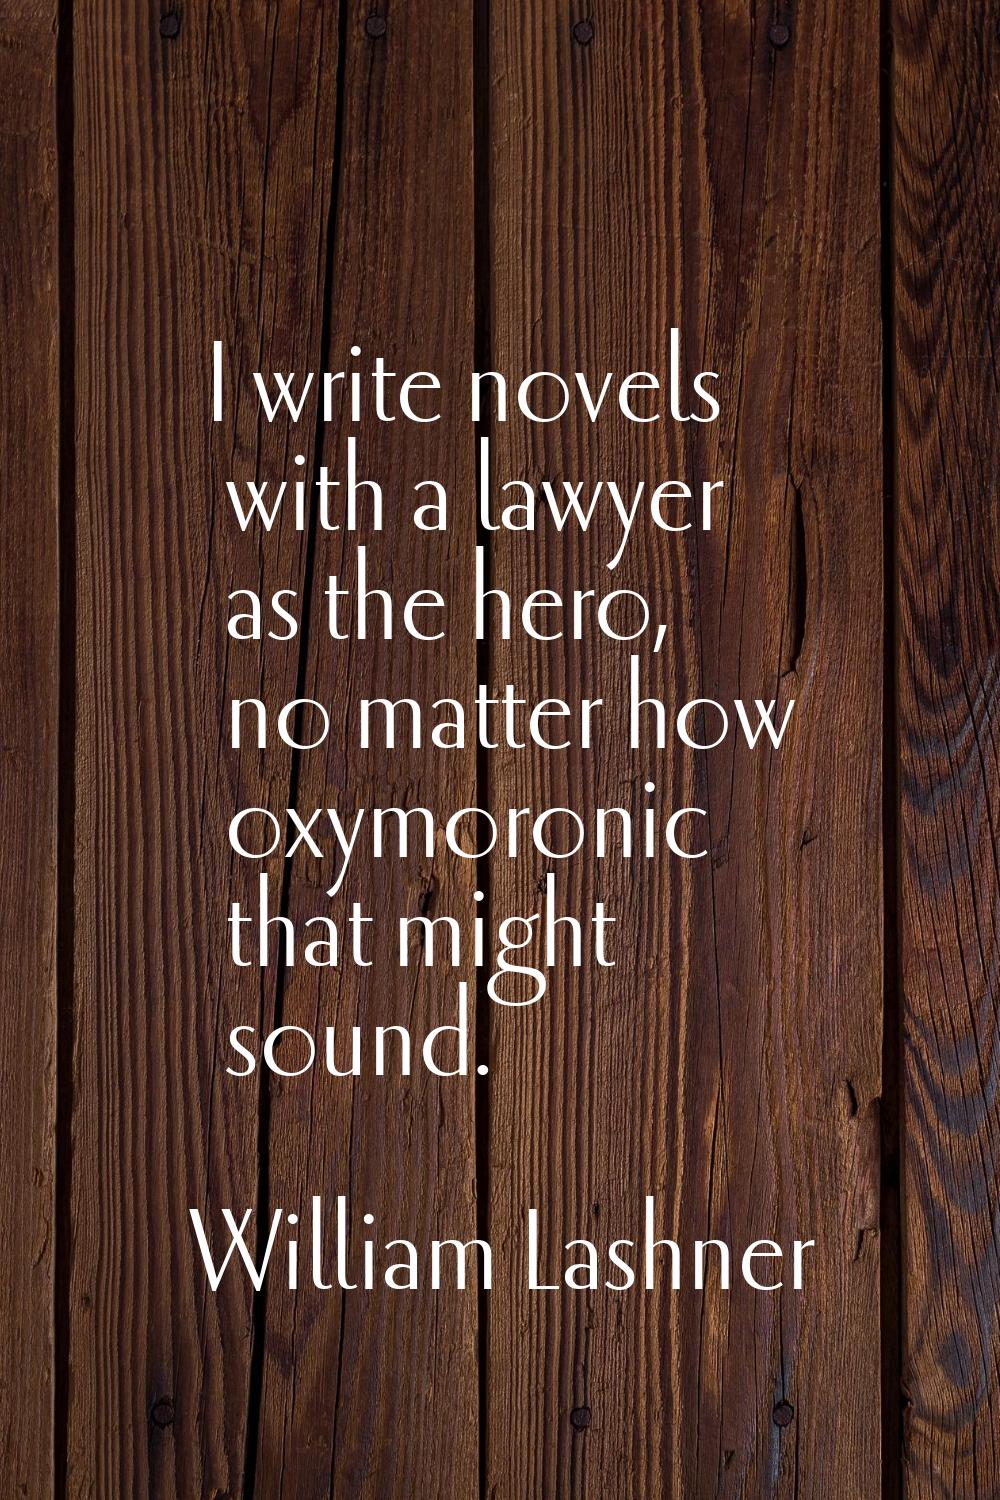 I write novels with a lawyer as the hero, no matter how oxymoronic that might sound.